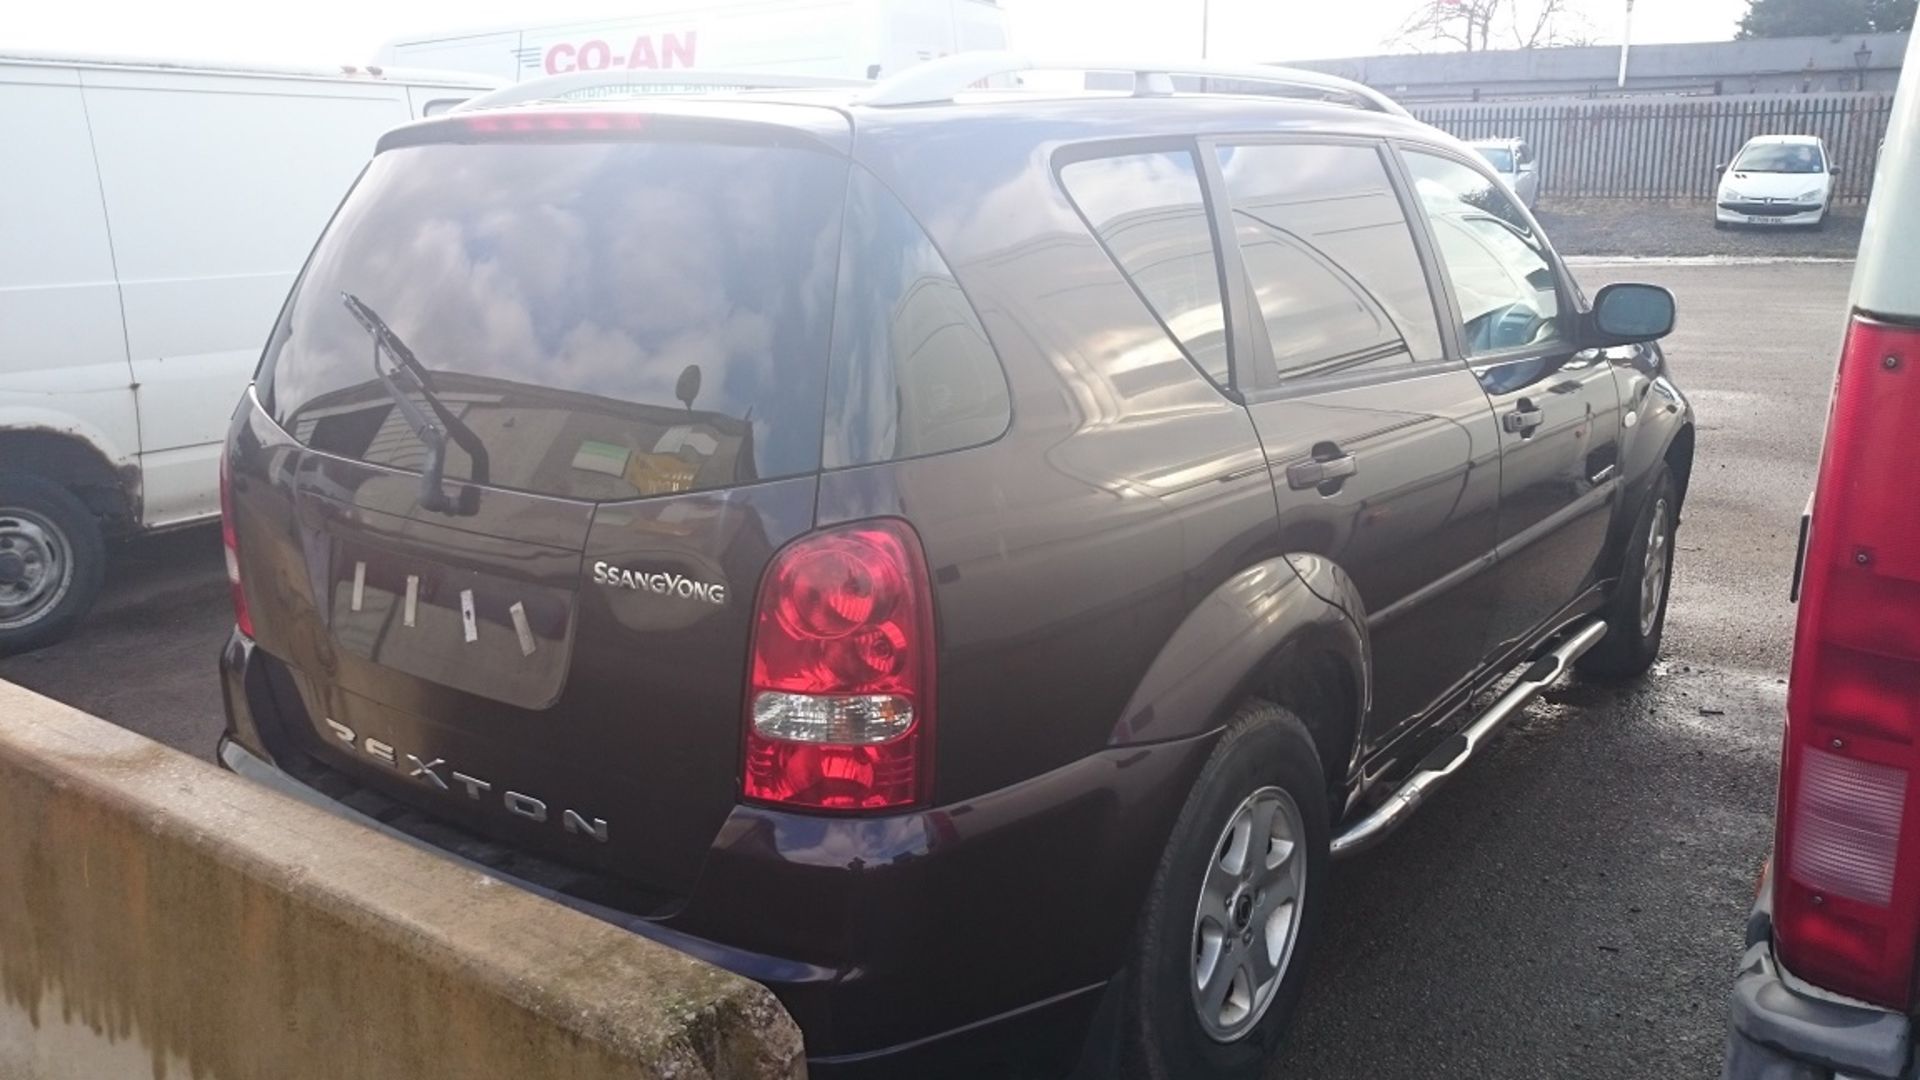 2008 SSANGYONG REXTON 270 S 5S AUTO 5 DOOR ESTATE - ENGINE CEASED WITH PARTS TO REPAIR *NO VAT*